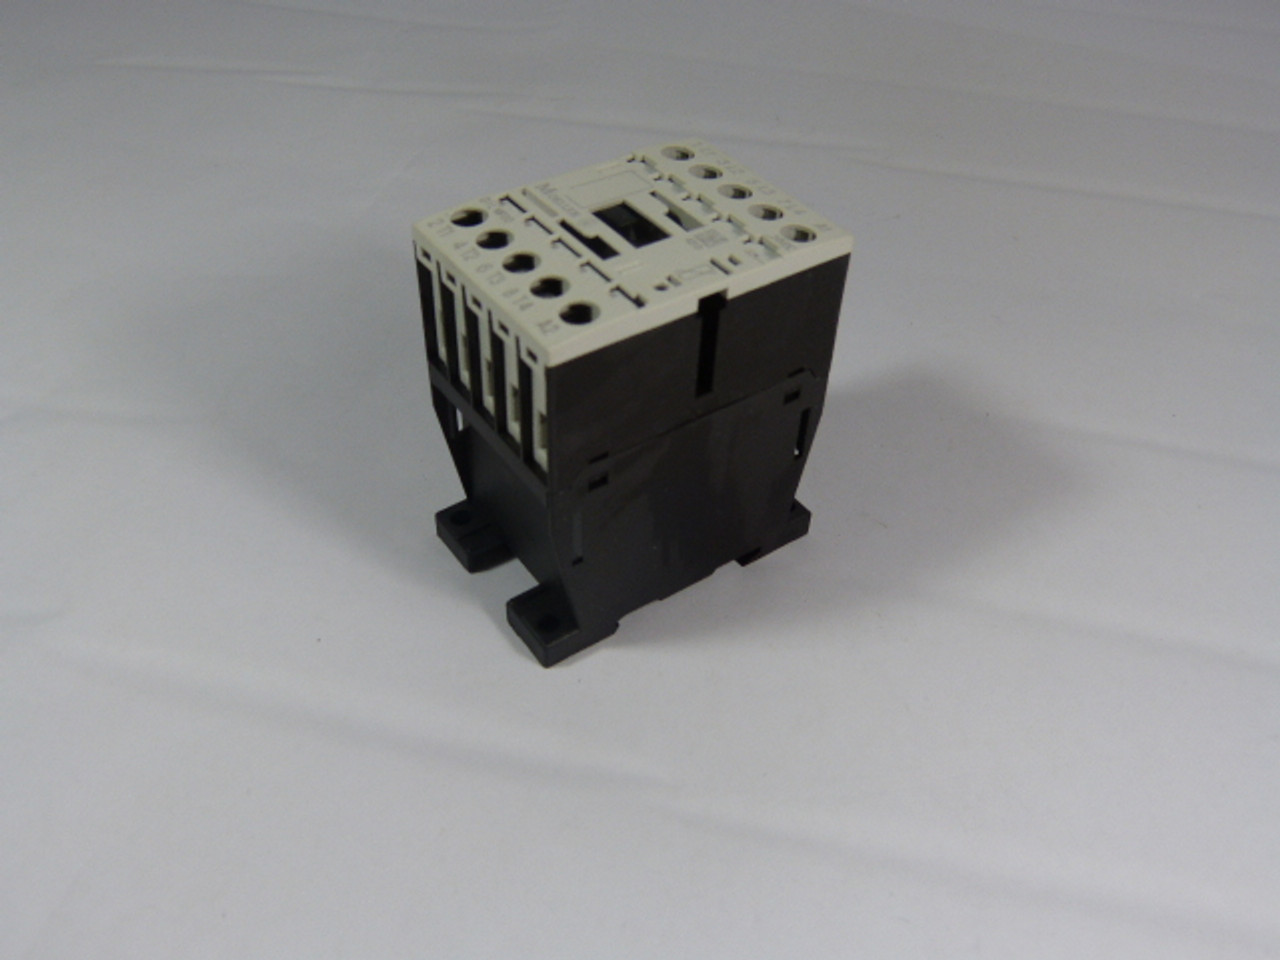 Moeller DILMP20-24VDC Contactor 20 Amp 4No 4Pole 400Vac USED